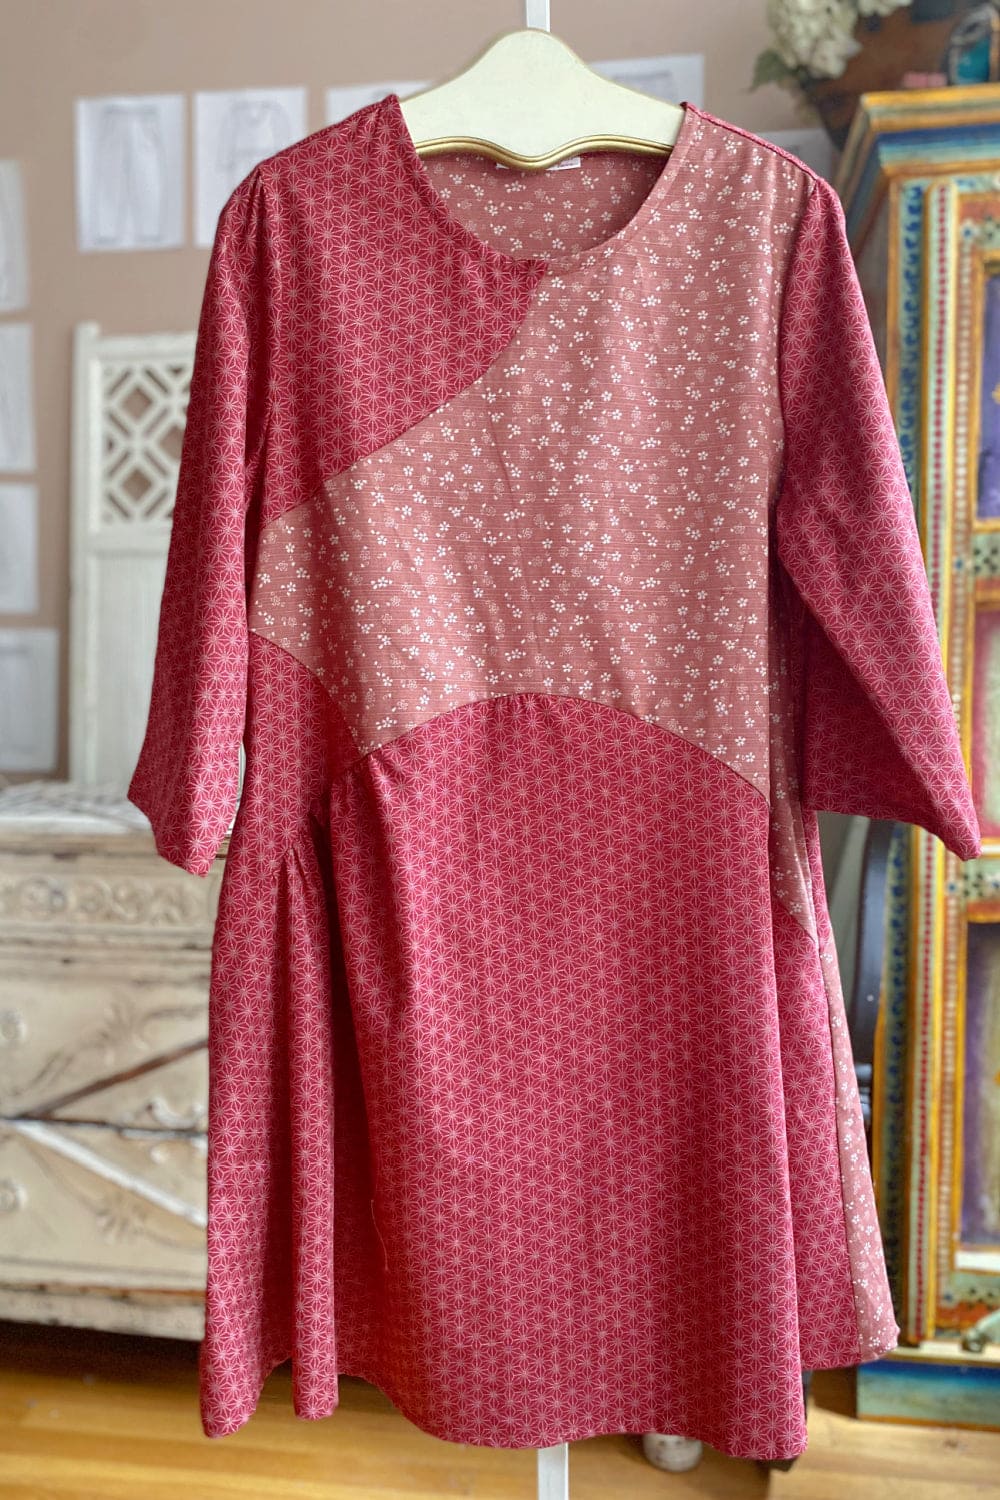 Pretty rose colored floral tunic dress with long sleeves and gathering detail.